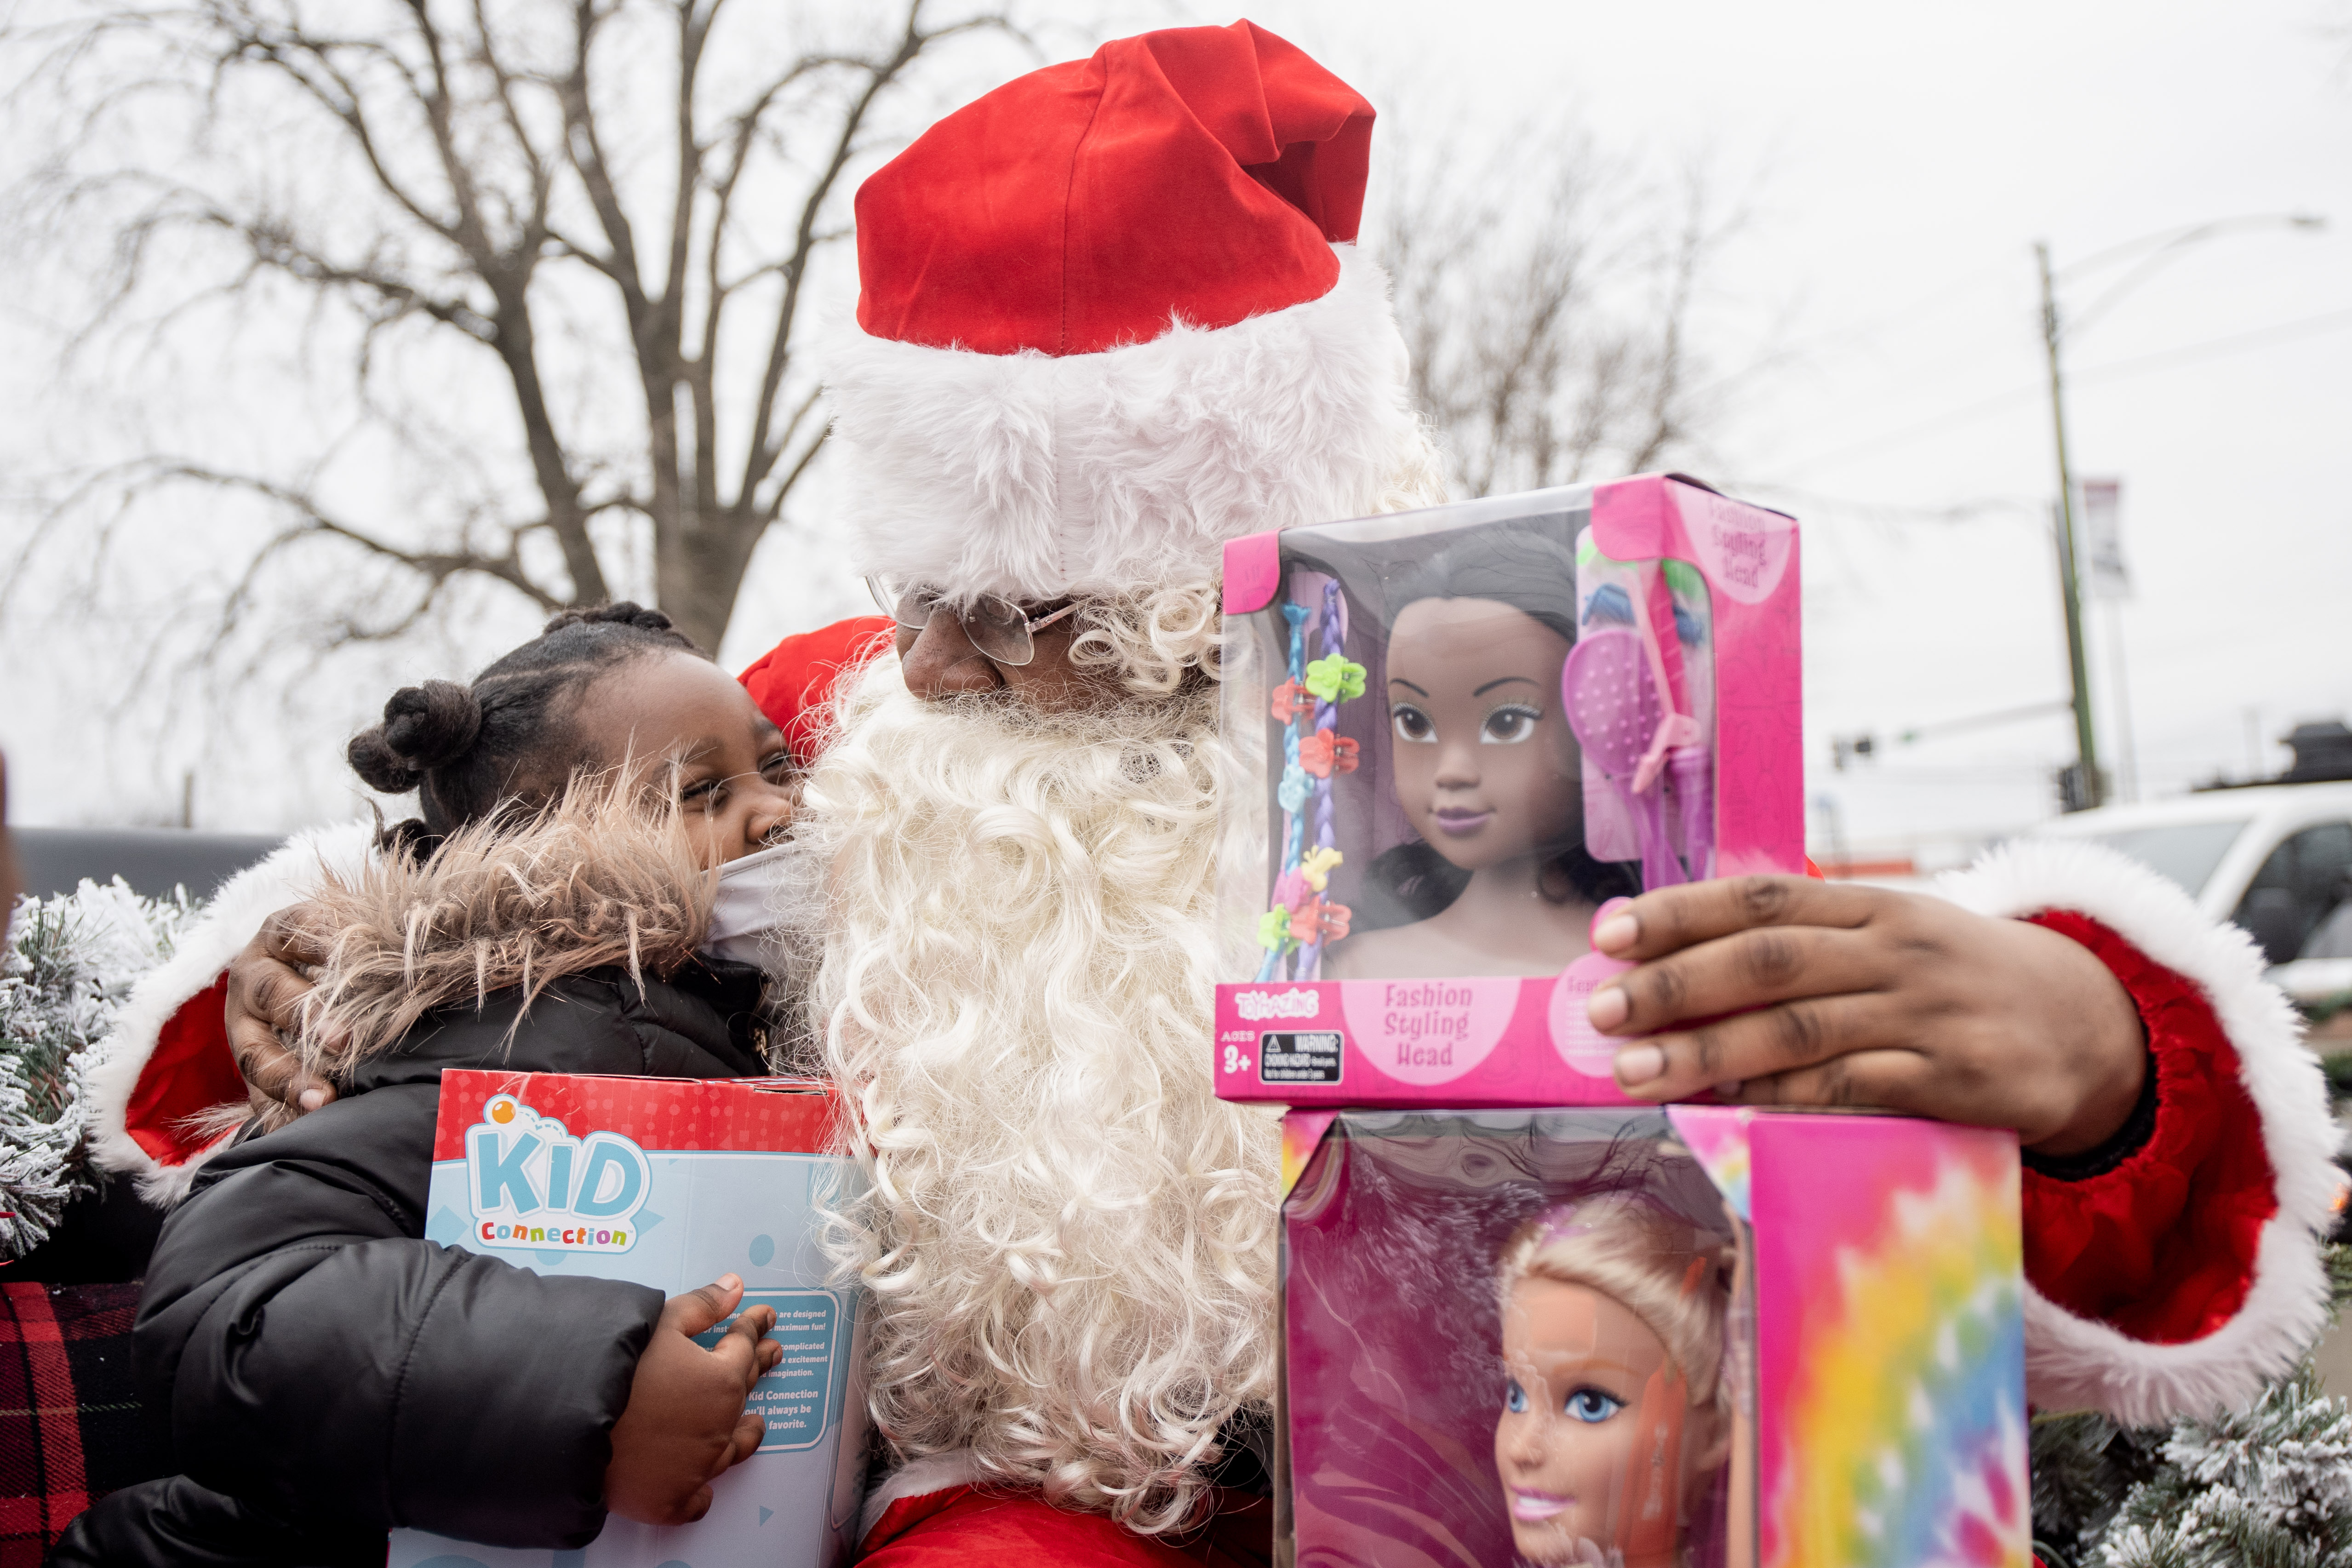 Early Walker, dressed as Santa Claus, hugs Aubrey Broughton, sister of 7-year-old Serenity Brughton, who was fatally shot in August, in the parking lot of the 5th District Police station in Pullman on Friday.